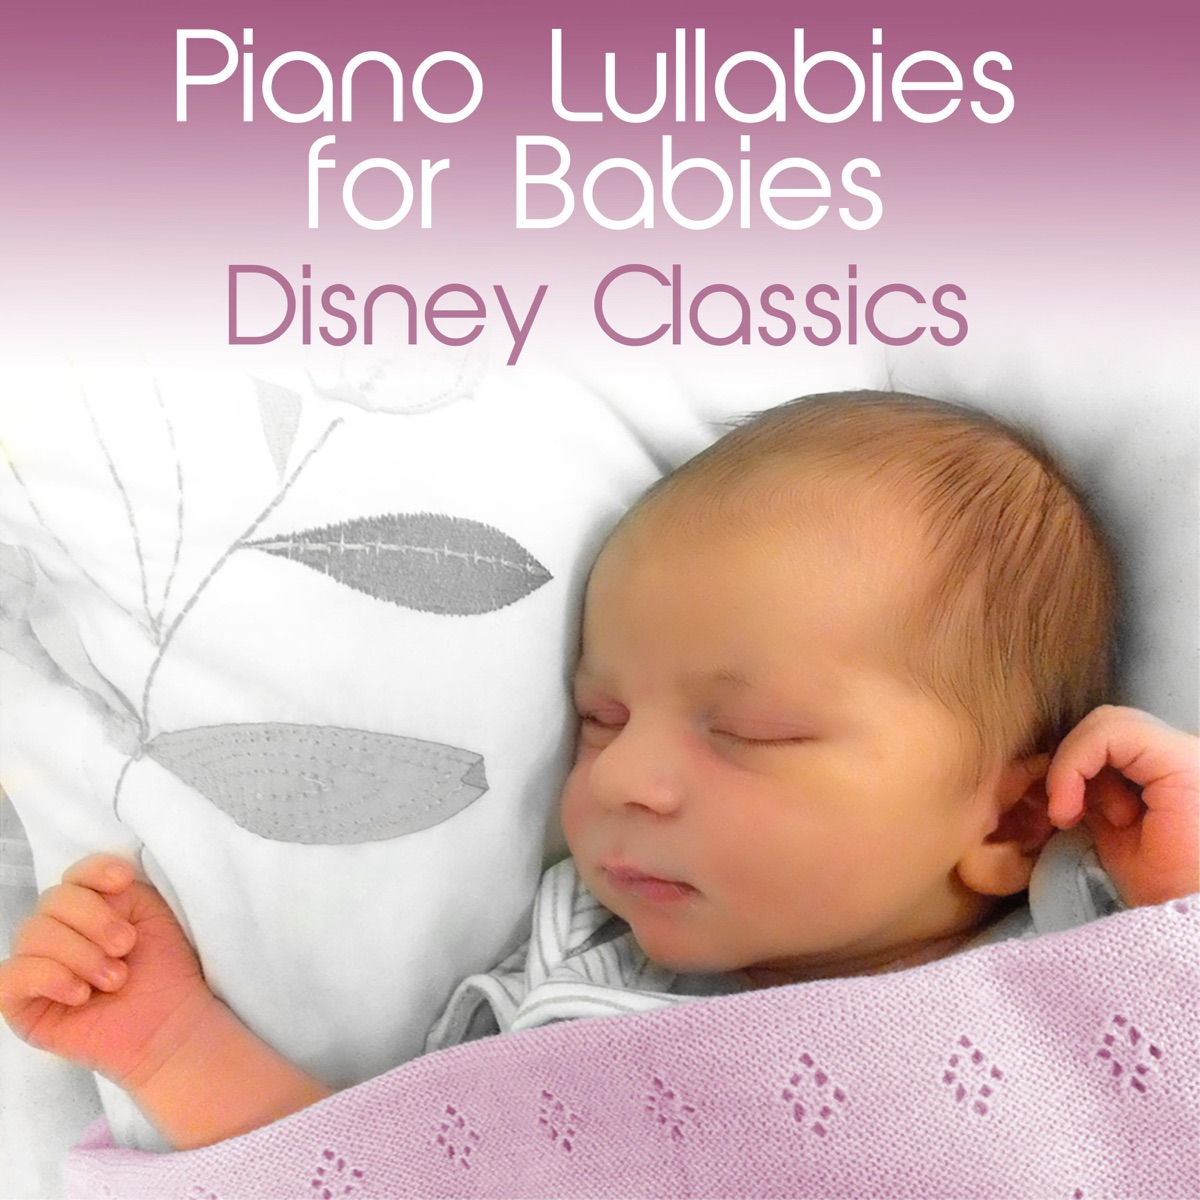 Piano Lullabies for Babies - Album by Andrew Holdsworth - Apple Music